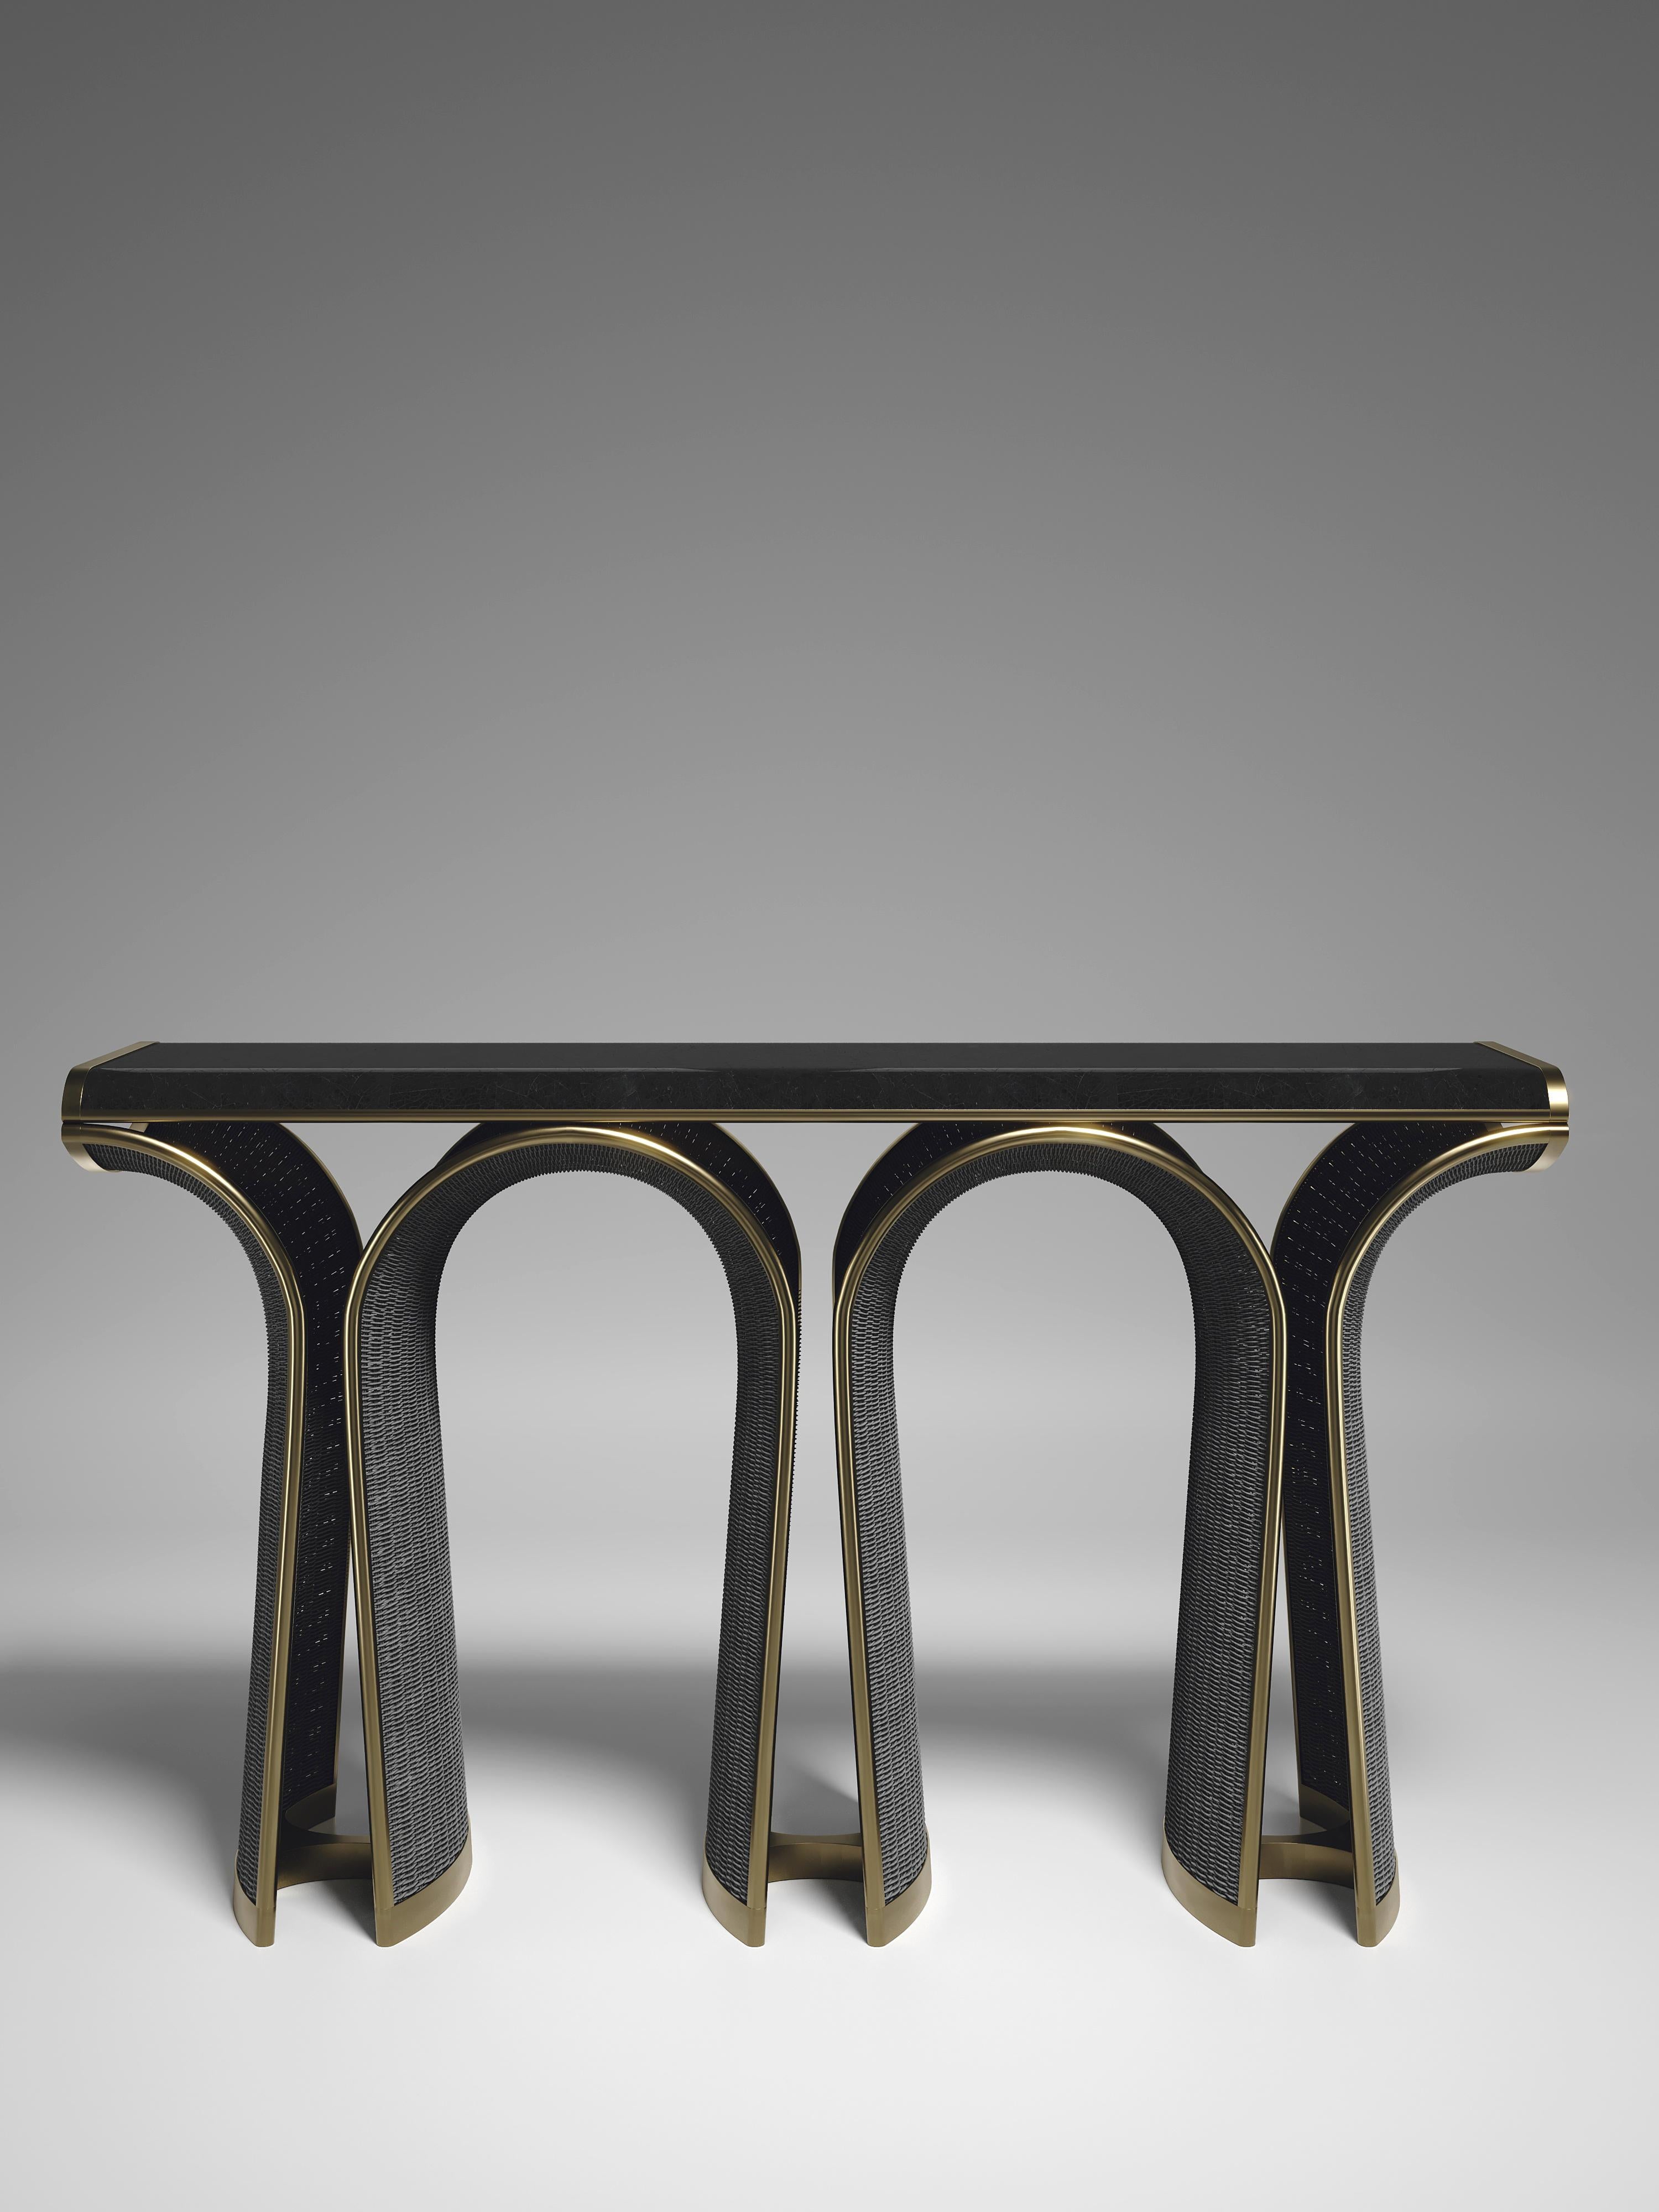 The Nymphea Console by R & Y Augousti is a part of their new Rattan capsule launch. The piece explores the brand's iconic DNA of bringing old world artisanal craft into a contemporary and utterly luxury feel. This table is done in a black rattan